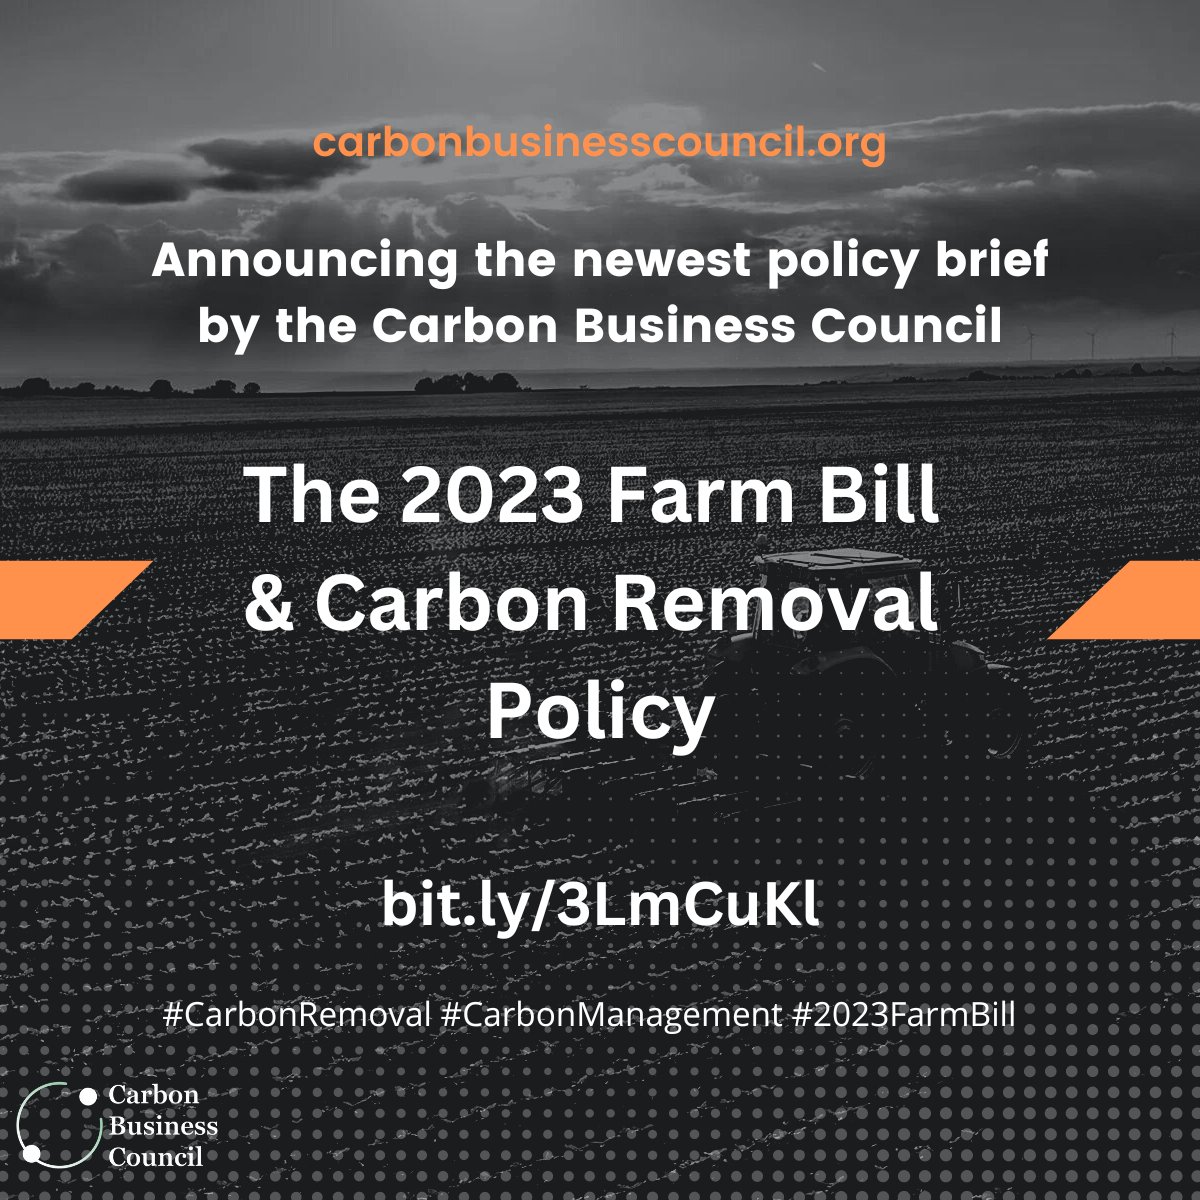 🔥HOT off the press! The Carbon Business Council has published a *policy brief* about #carbonremoval + the #2023FarmBill. This legislation, updated every 5 yrs, represents a huge opportunity to support farmers & ecosystems. Read the brief: bit.ly/3LmCuKl 🚜 A thread: